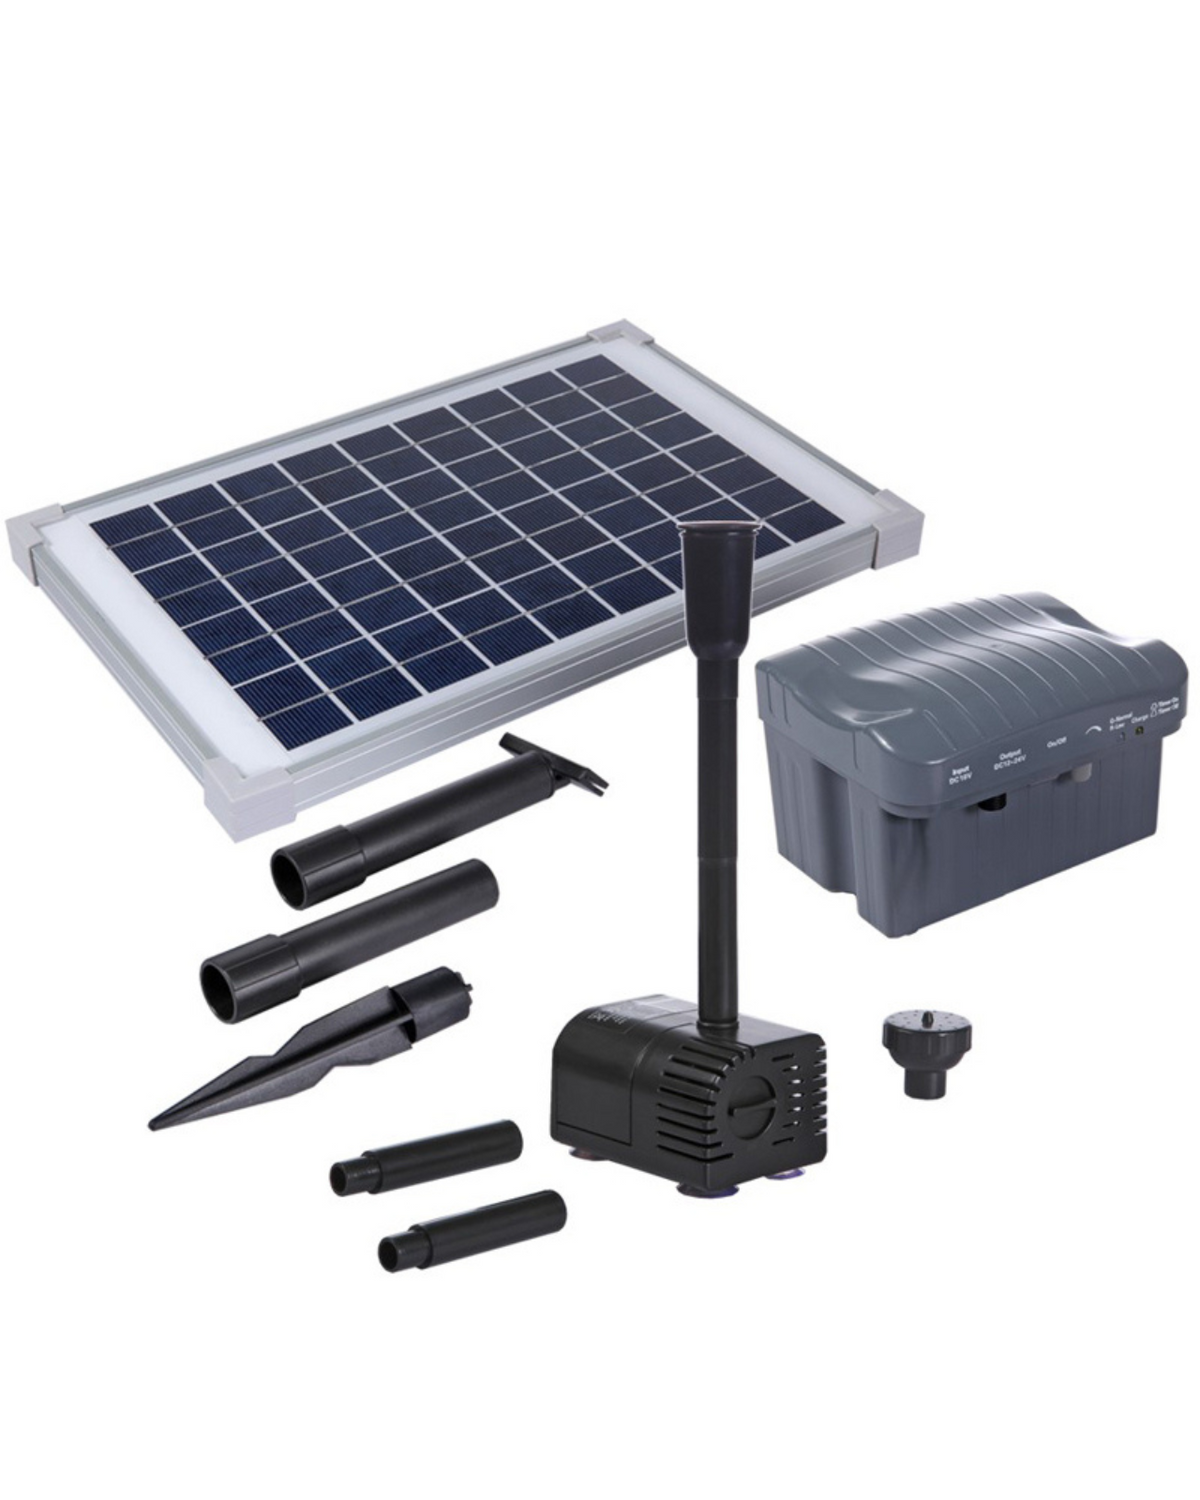 RSFB800 Solar Fountain Pump with Battery Backup 